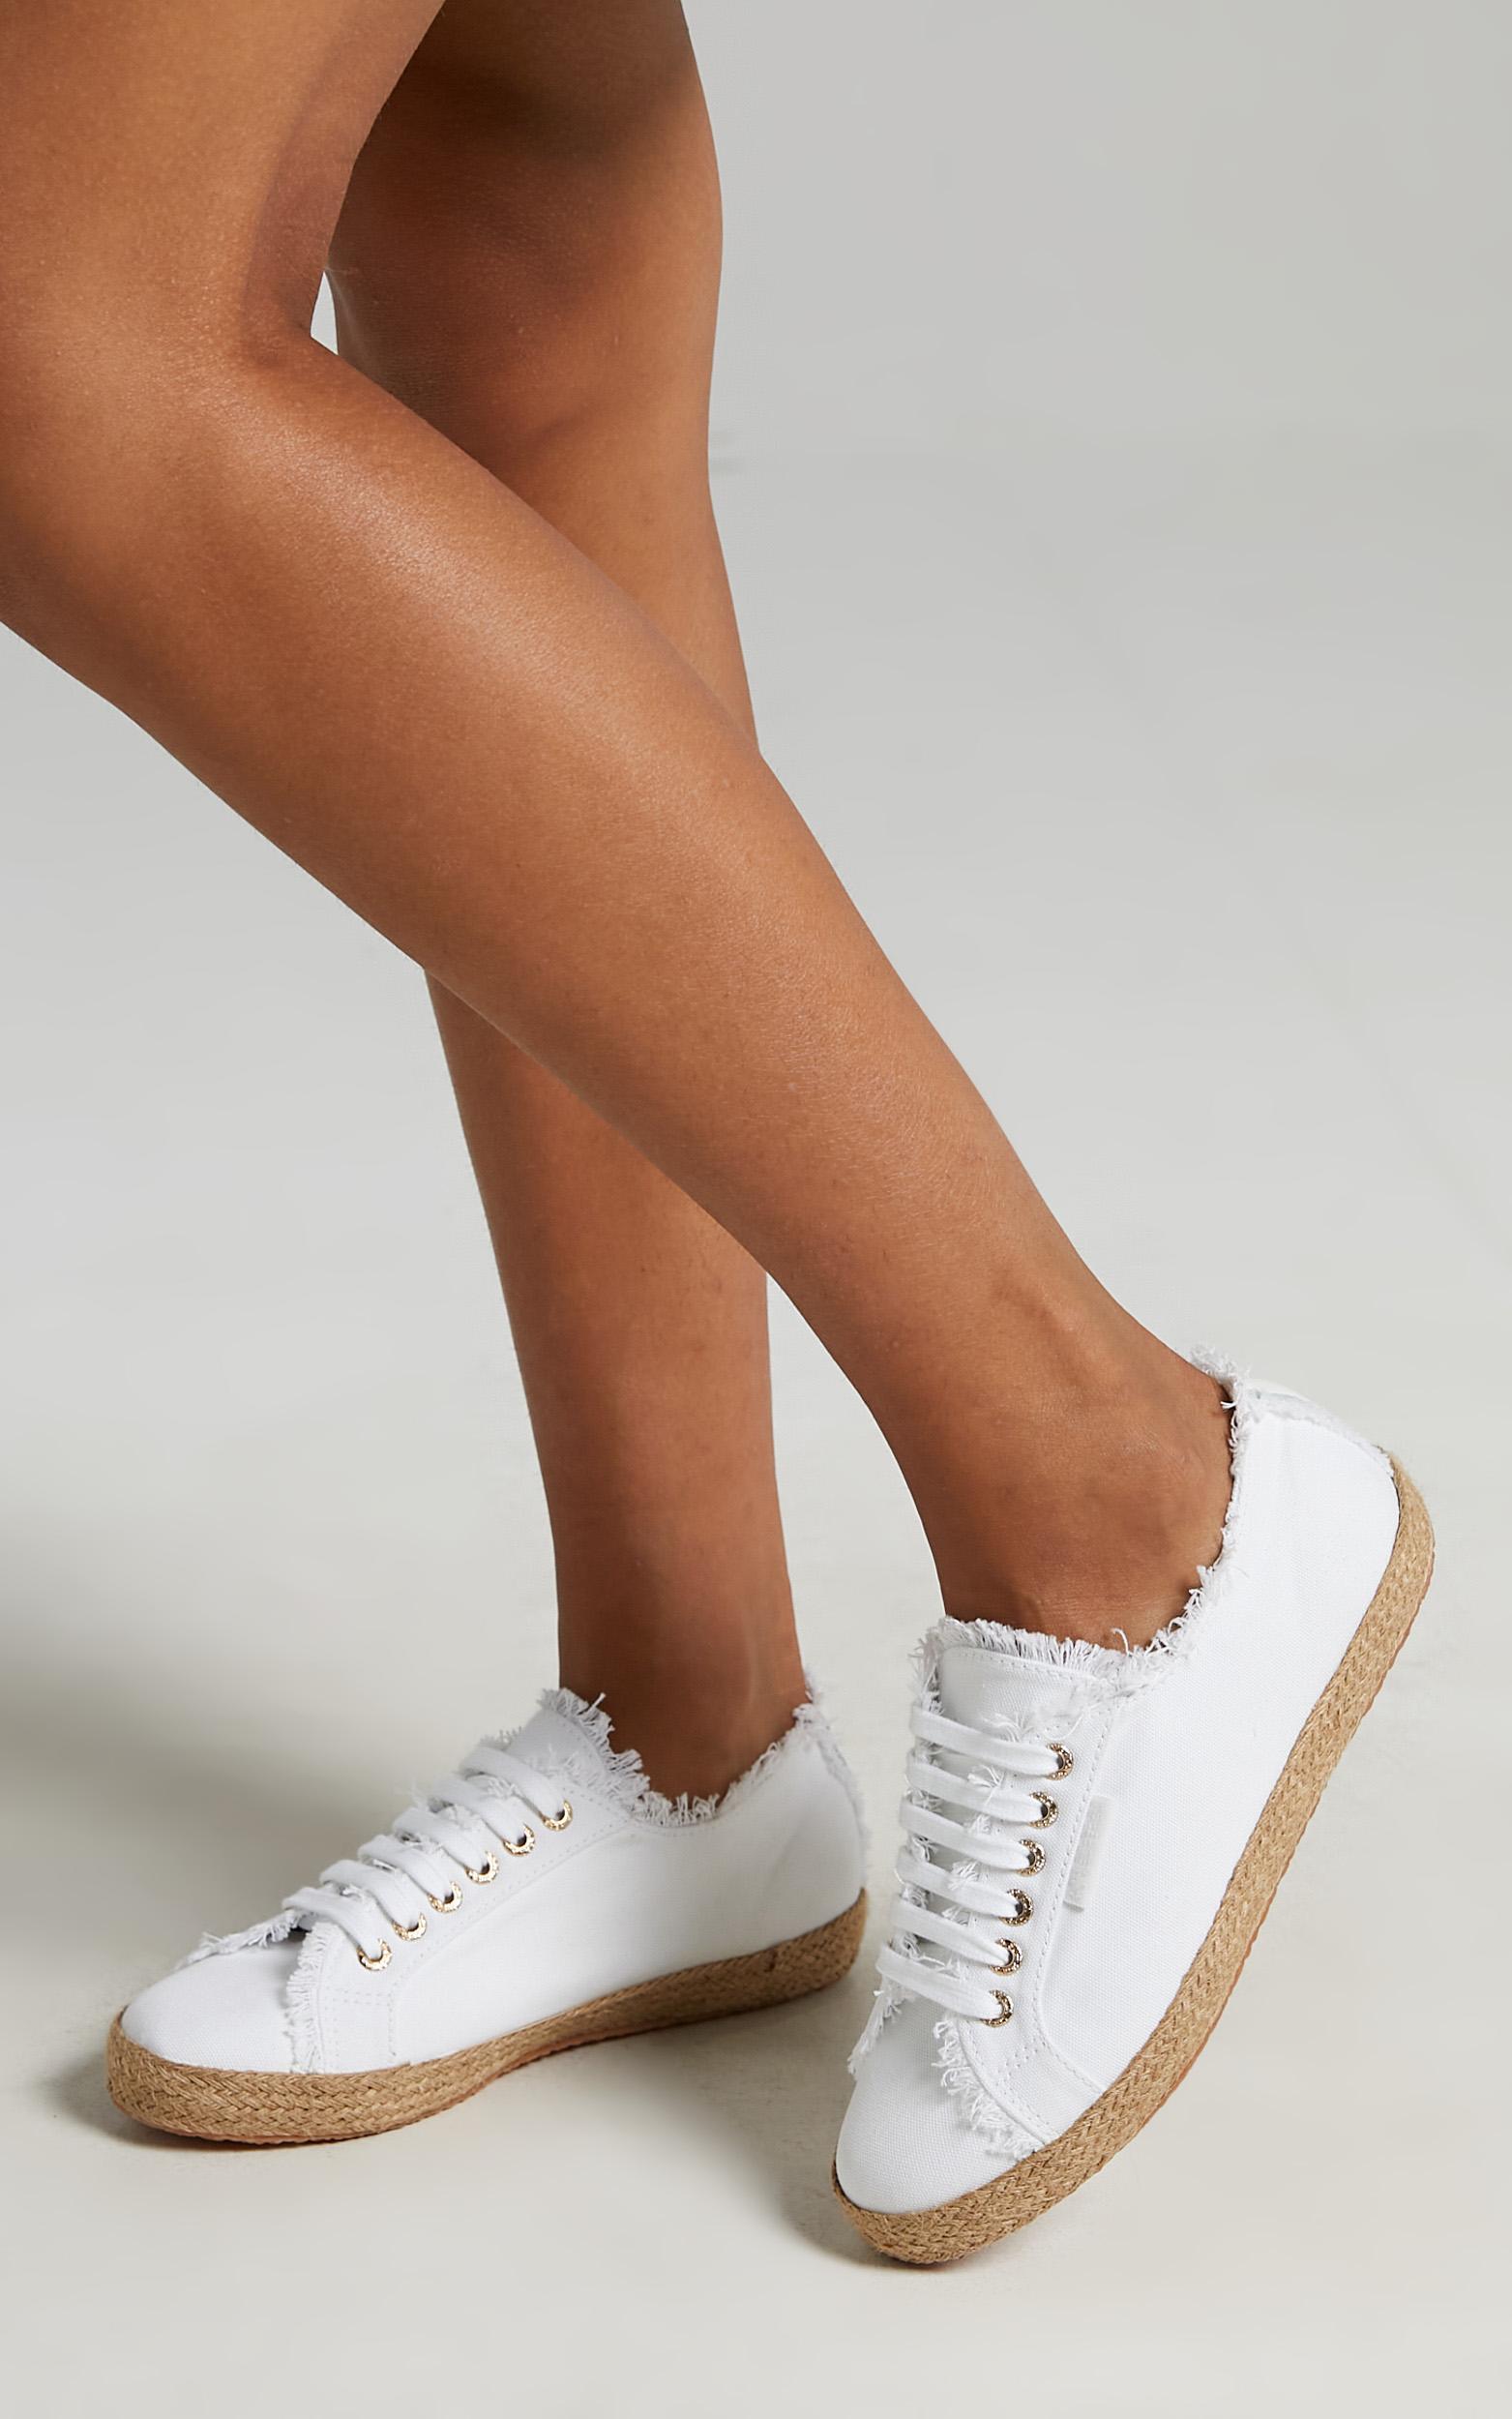 Superga - 2750 Fringed Cotton Rope Sneakers in 901 White - 05, WHT1, hi-res image number null